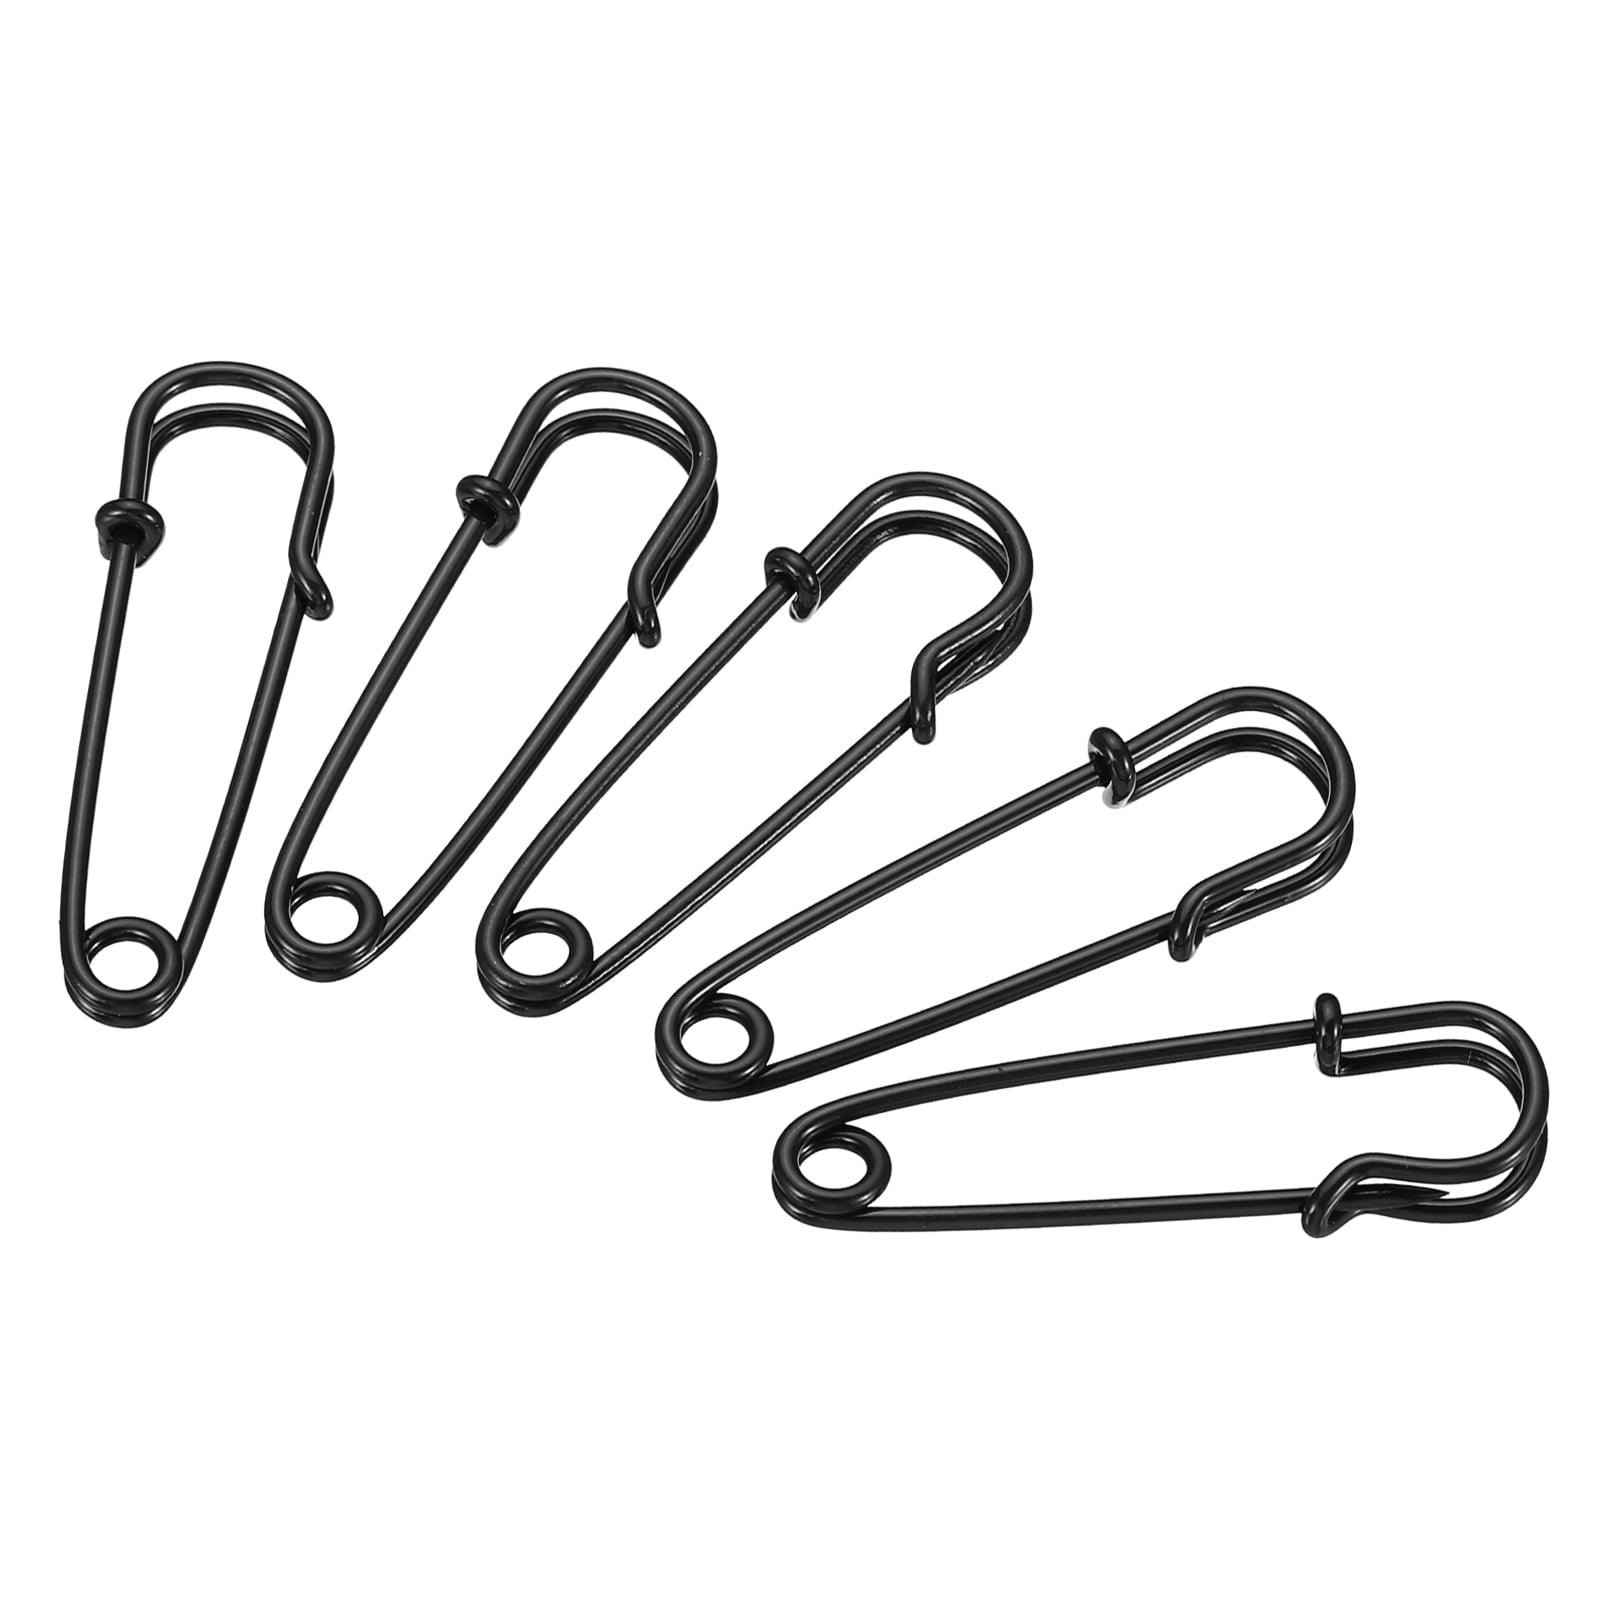 Mr. Pen- Safety Pins, 300 Pack, Assorted Sizes, Golden, Safety Metal Pins  for Clothes 